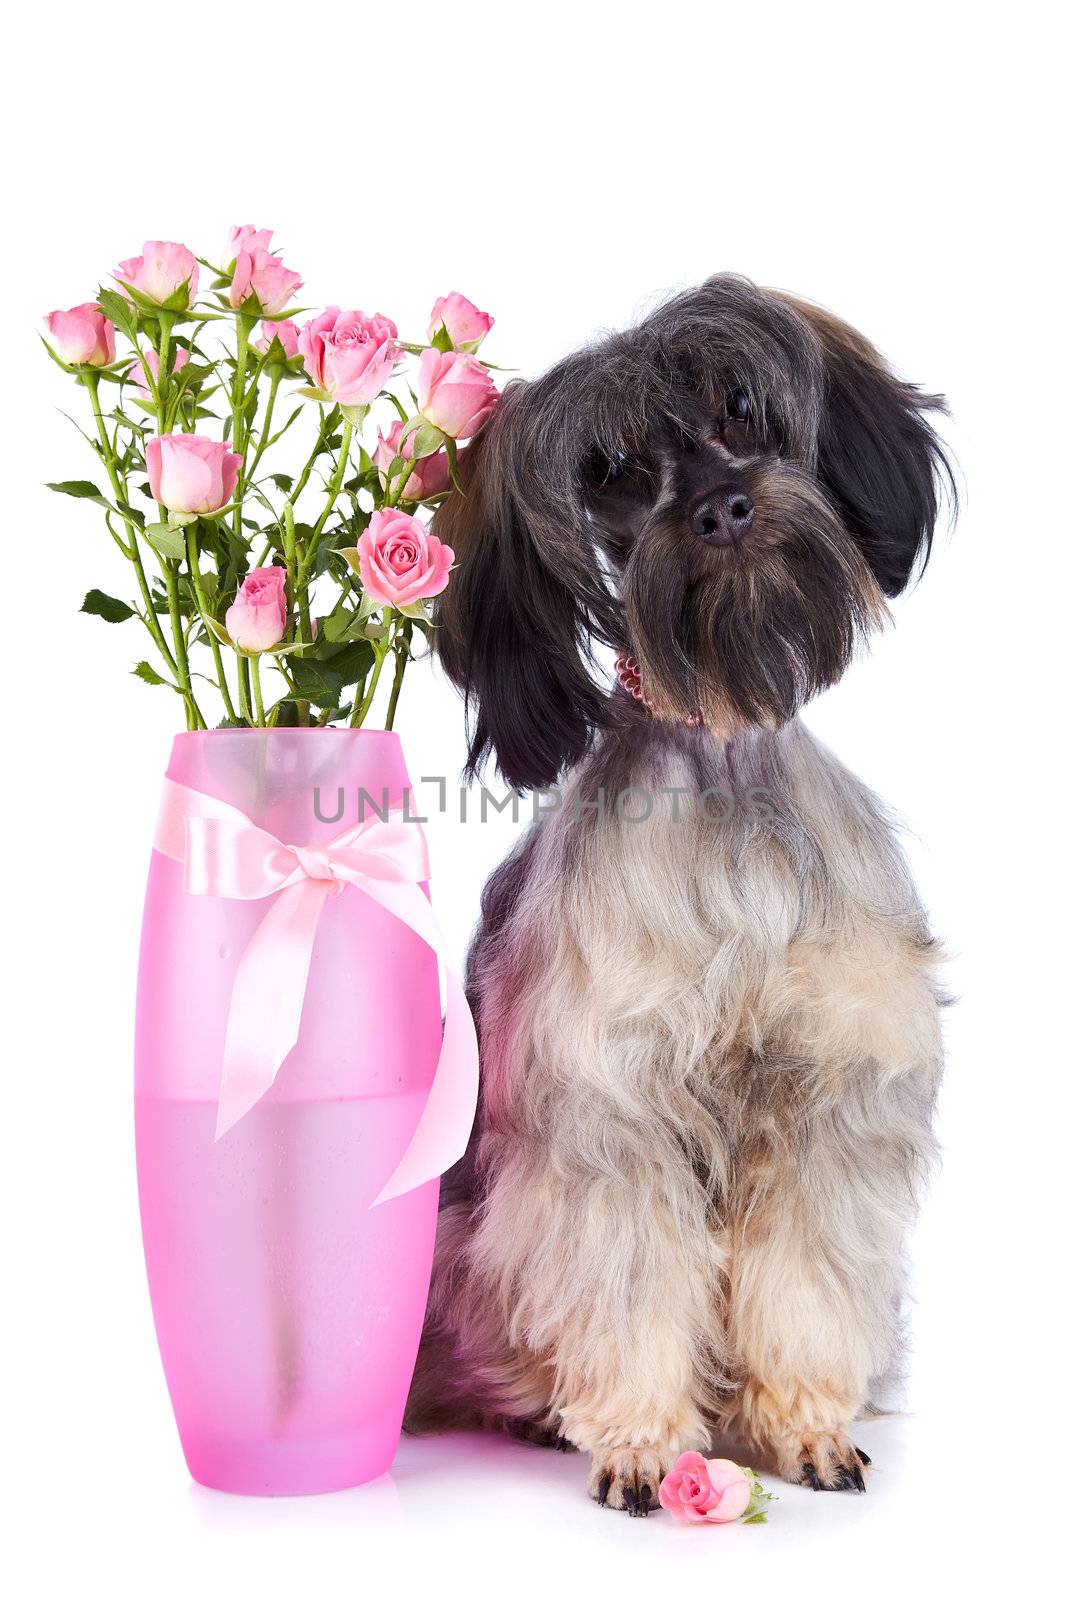 Small doggie. Decorative thoroughbred dog. Puppy of the Petersburg orchid. Shaggy doggie. Doggie and roses. Doggie and flowers.